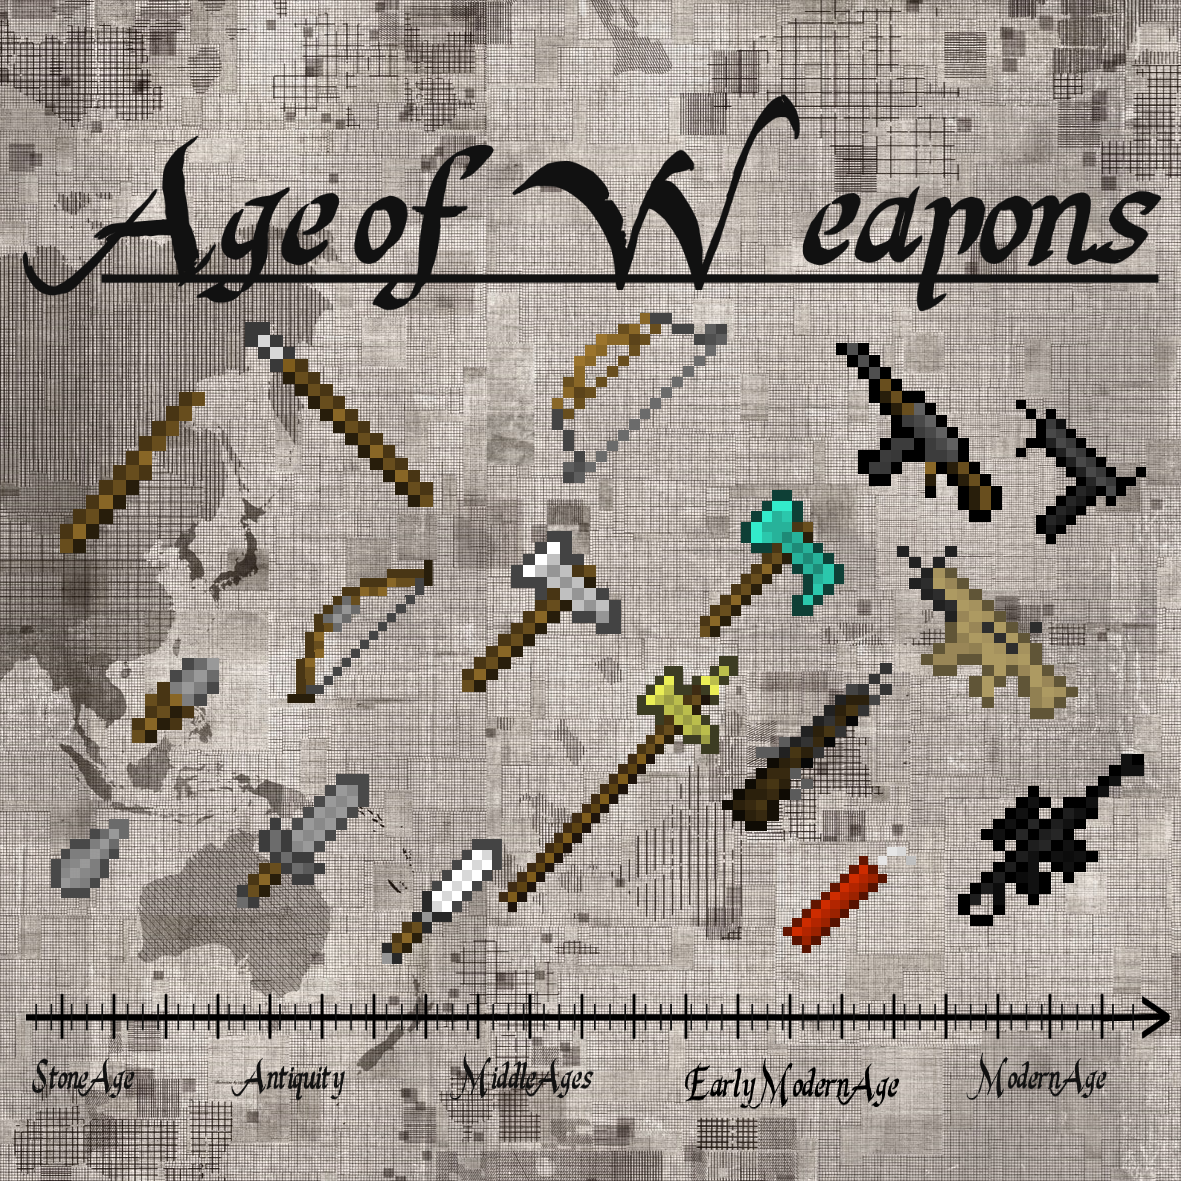 minecraft age of weapons